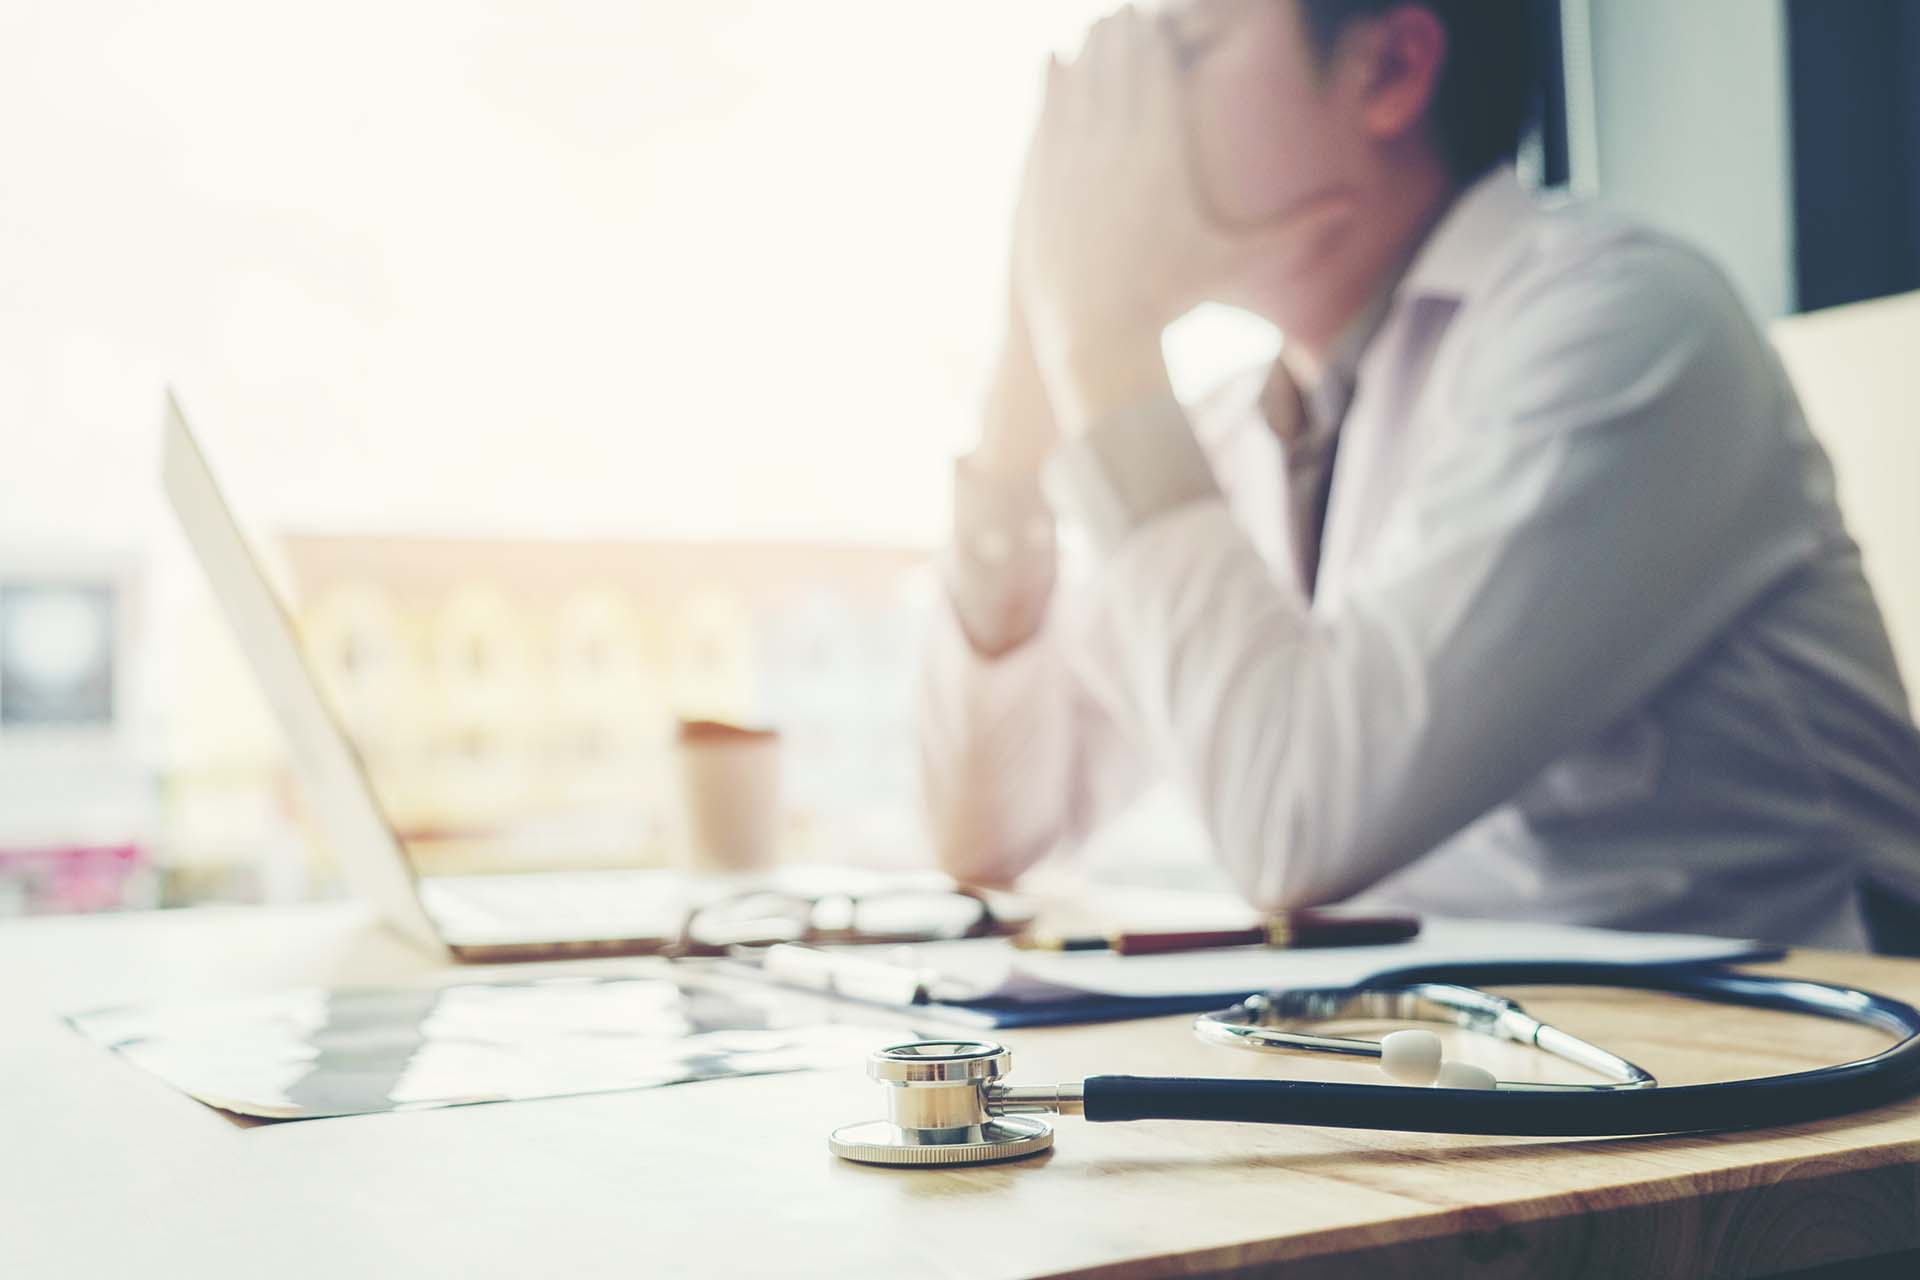 Executive healthcare coach for doctors struggling with burnout